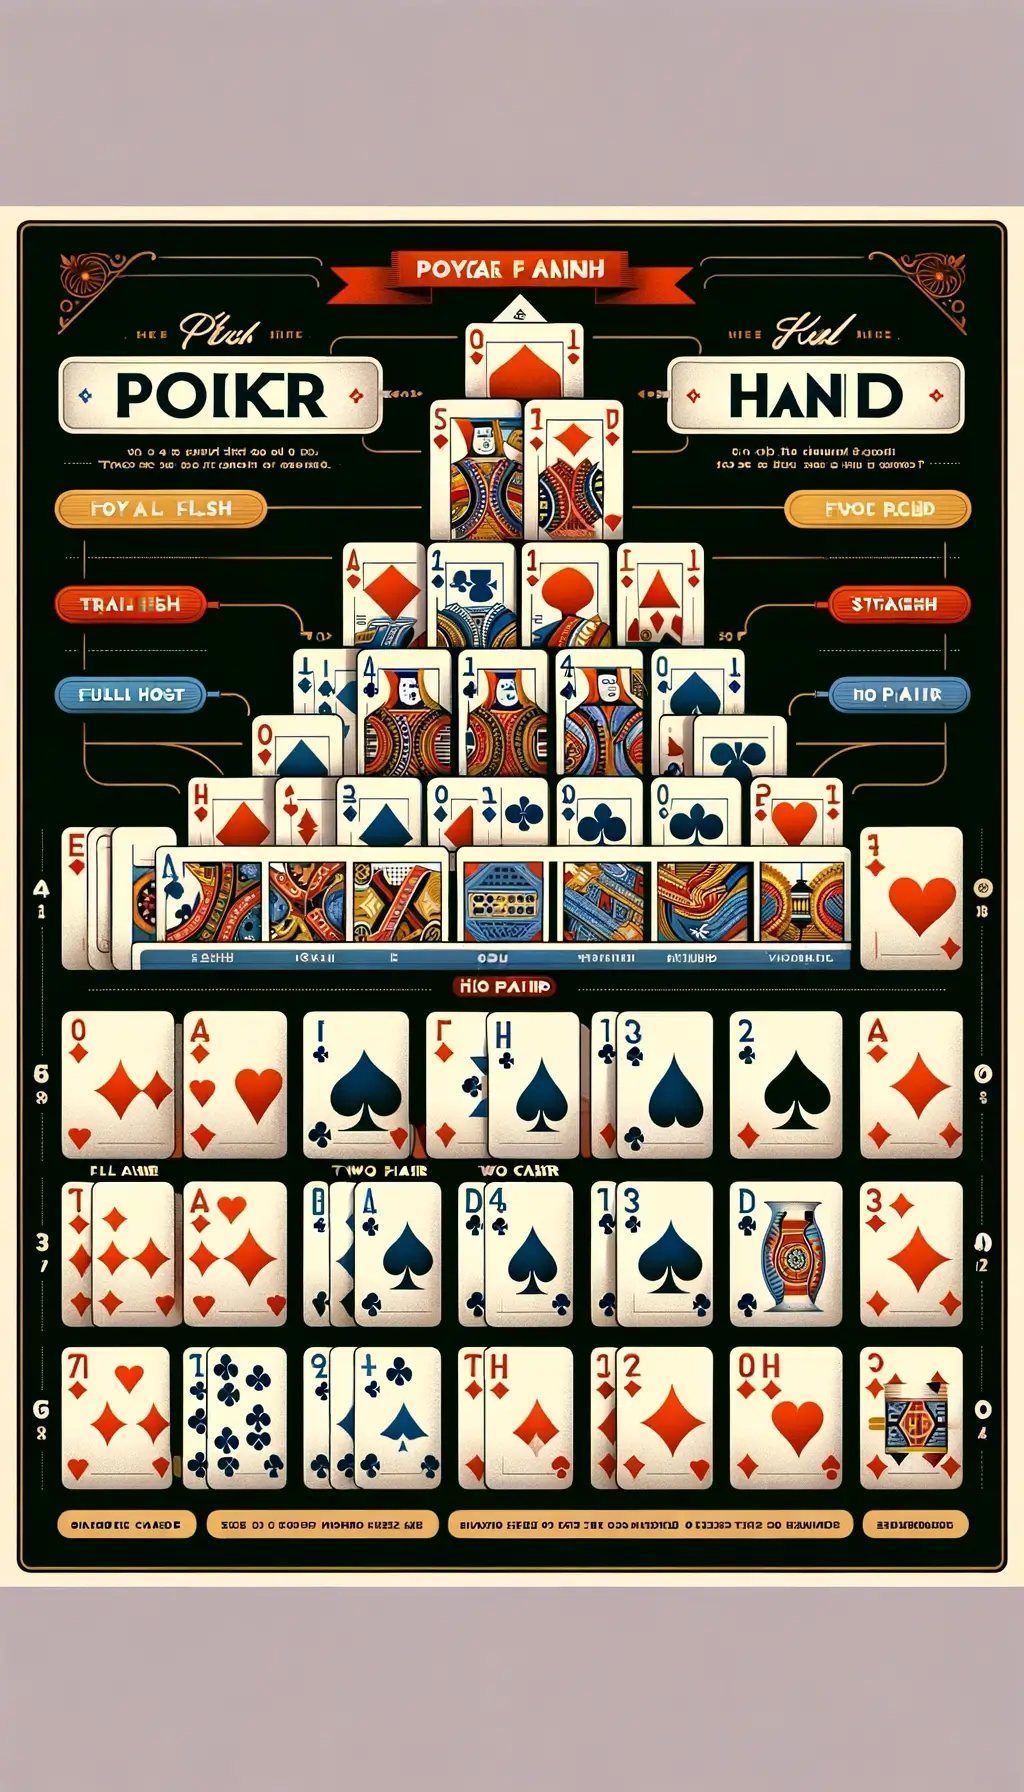 This educational infographic clearly shows the hierarchy of poker hands from highest to lowest. Each hand type, including Royal Flush, Straight Flush, and others, is illustrated with a corresponding set of playing cards, making it easy to understand for beginners.